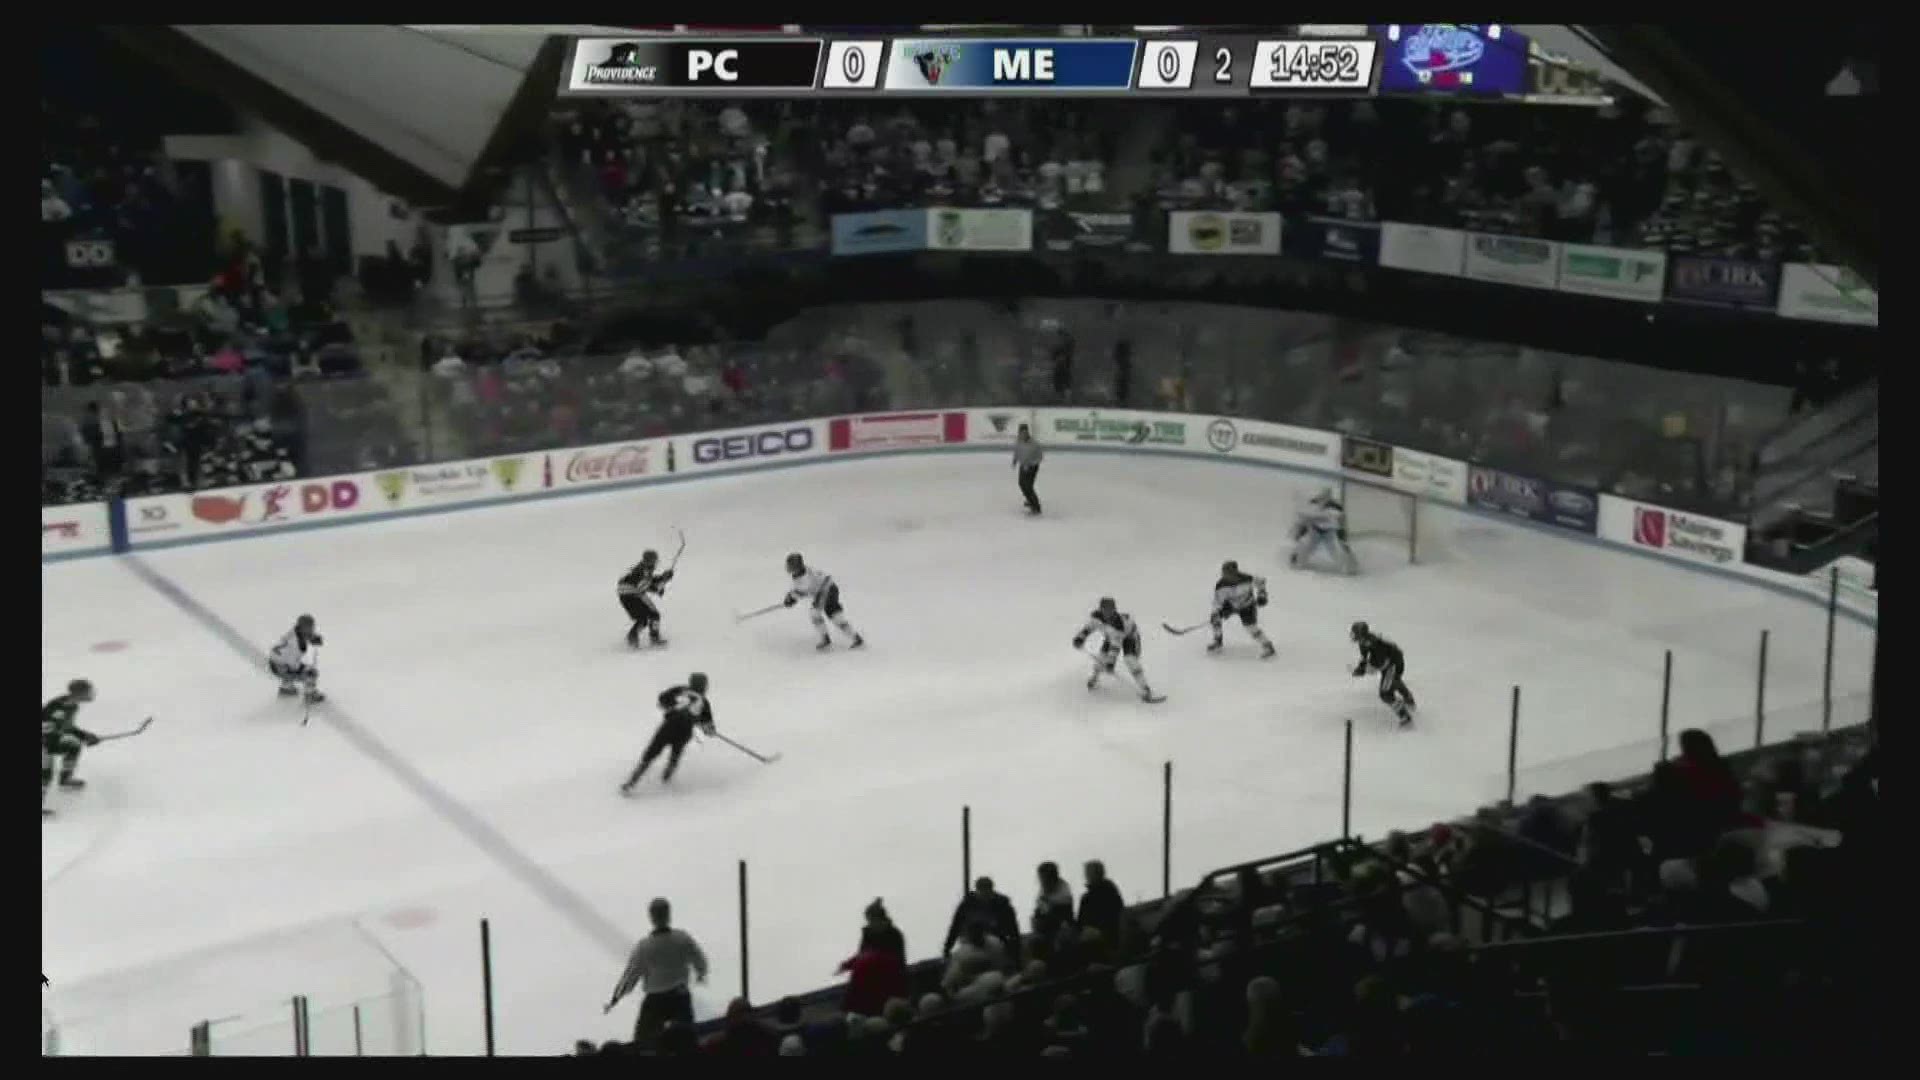 Division 1 college hockey, including hockey at the University of Maine, is delayed due to the pandemic.